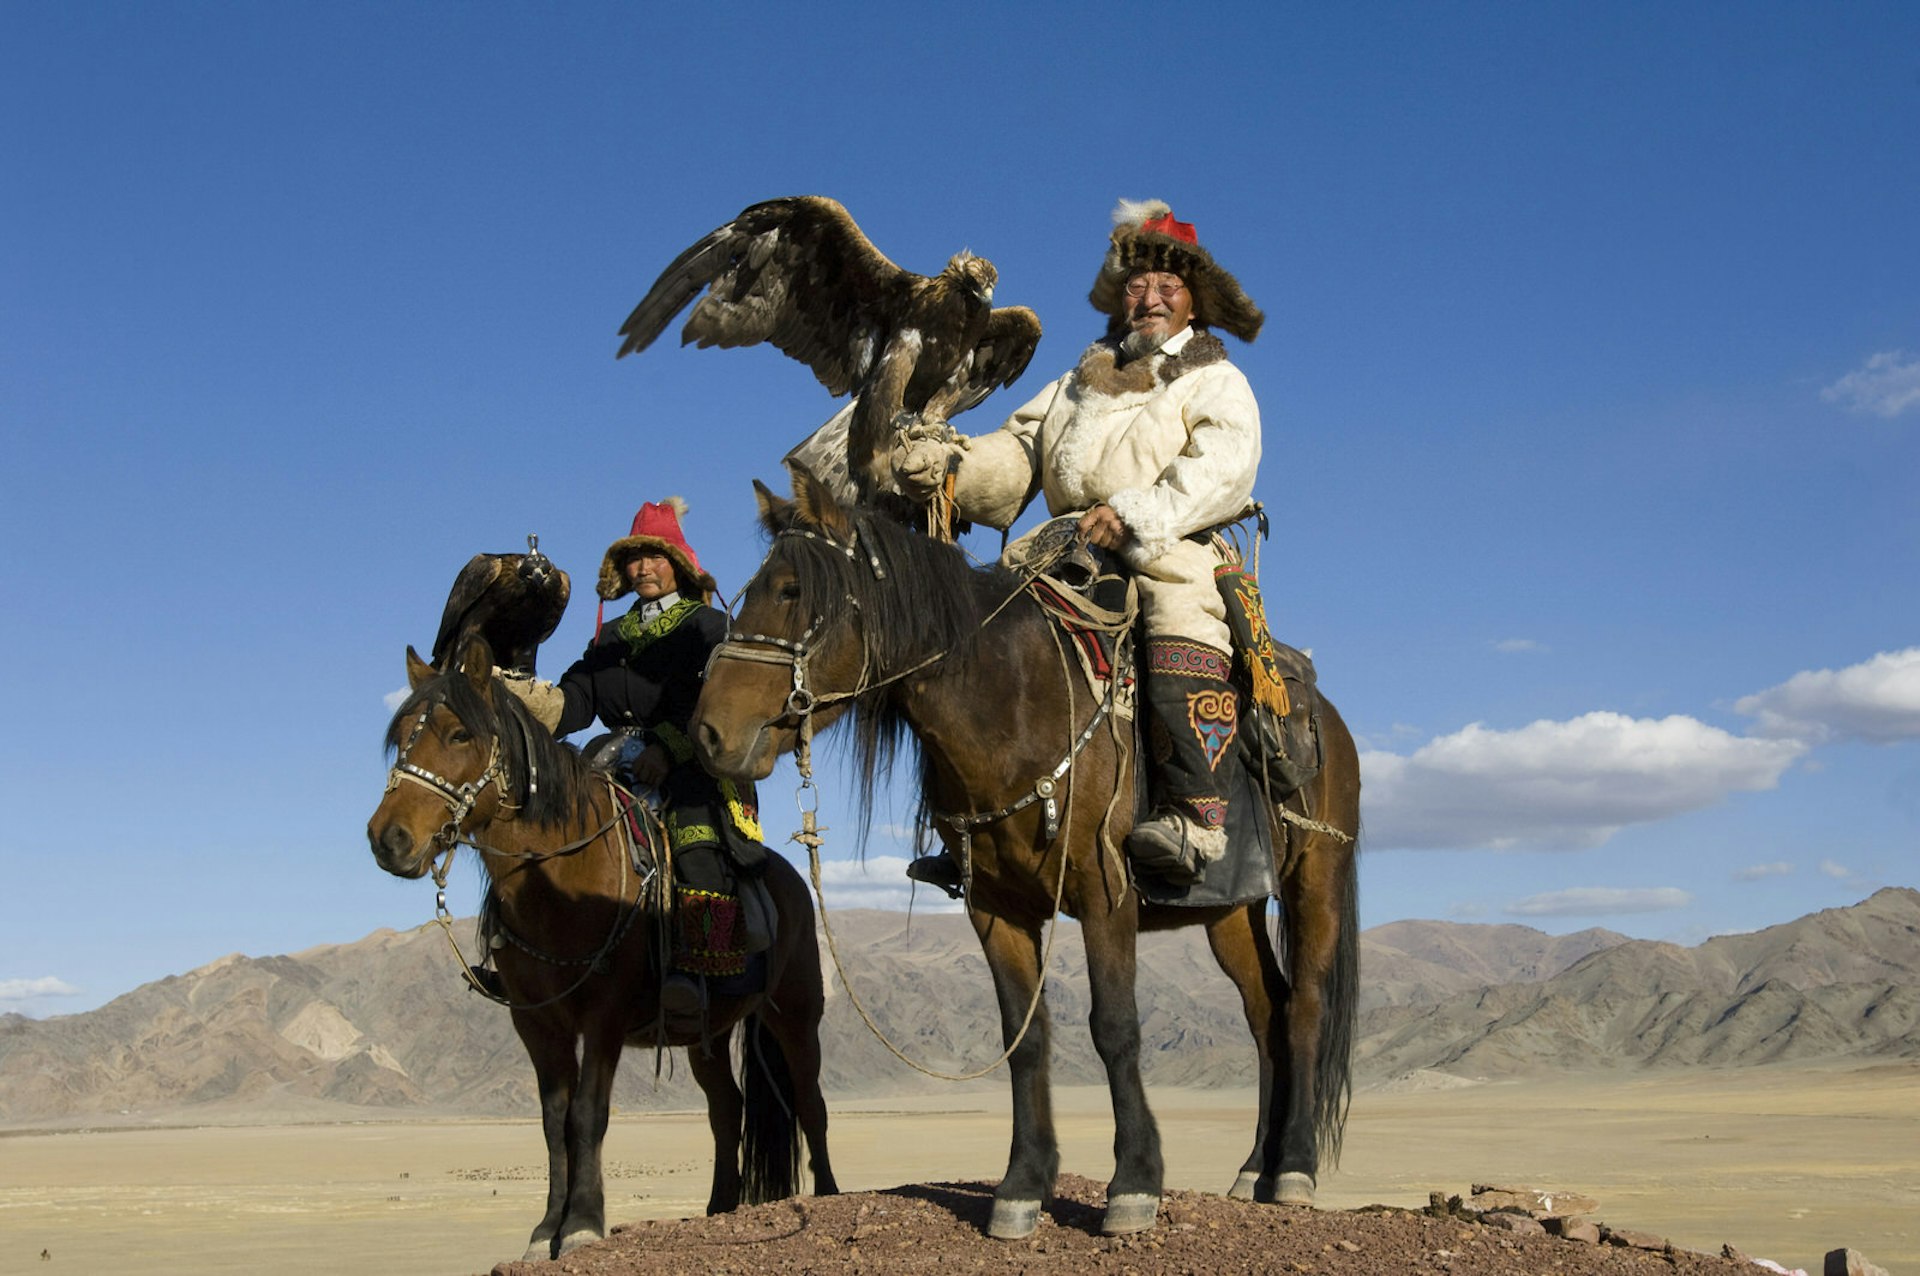 Kazakh men have used birds of prey to hunt in western Mongolia since the 15th century. Though it is threatened by the encroachment of globalization, the hunt remains an honorable tradition and rite of passage for the Kazakh men. Hunting with Eagles takes place in the winter, and the eagles are trained to hunt marmots, foxes and wolves.